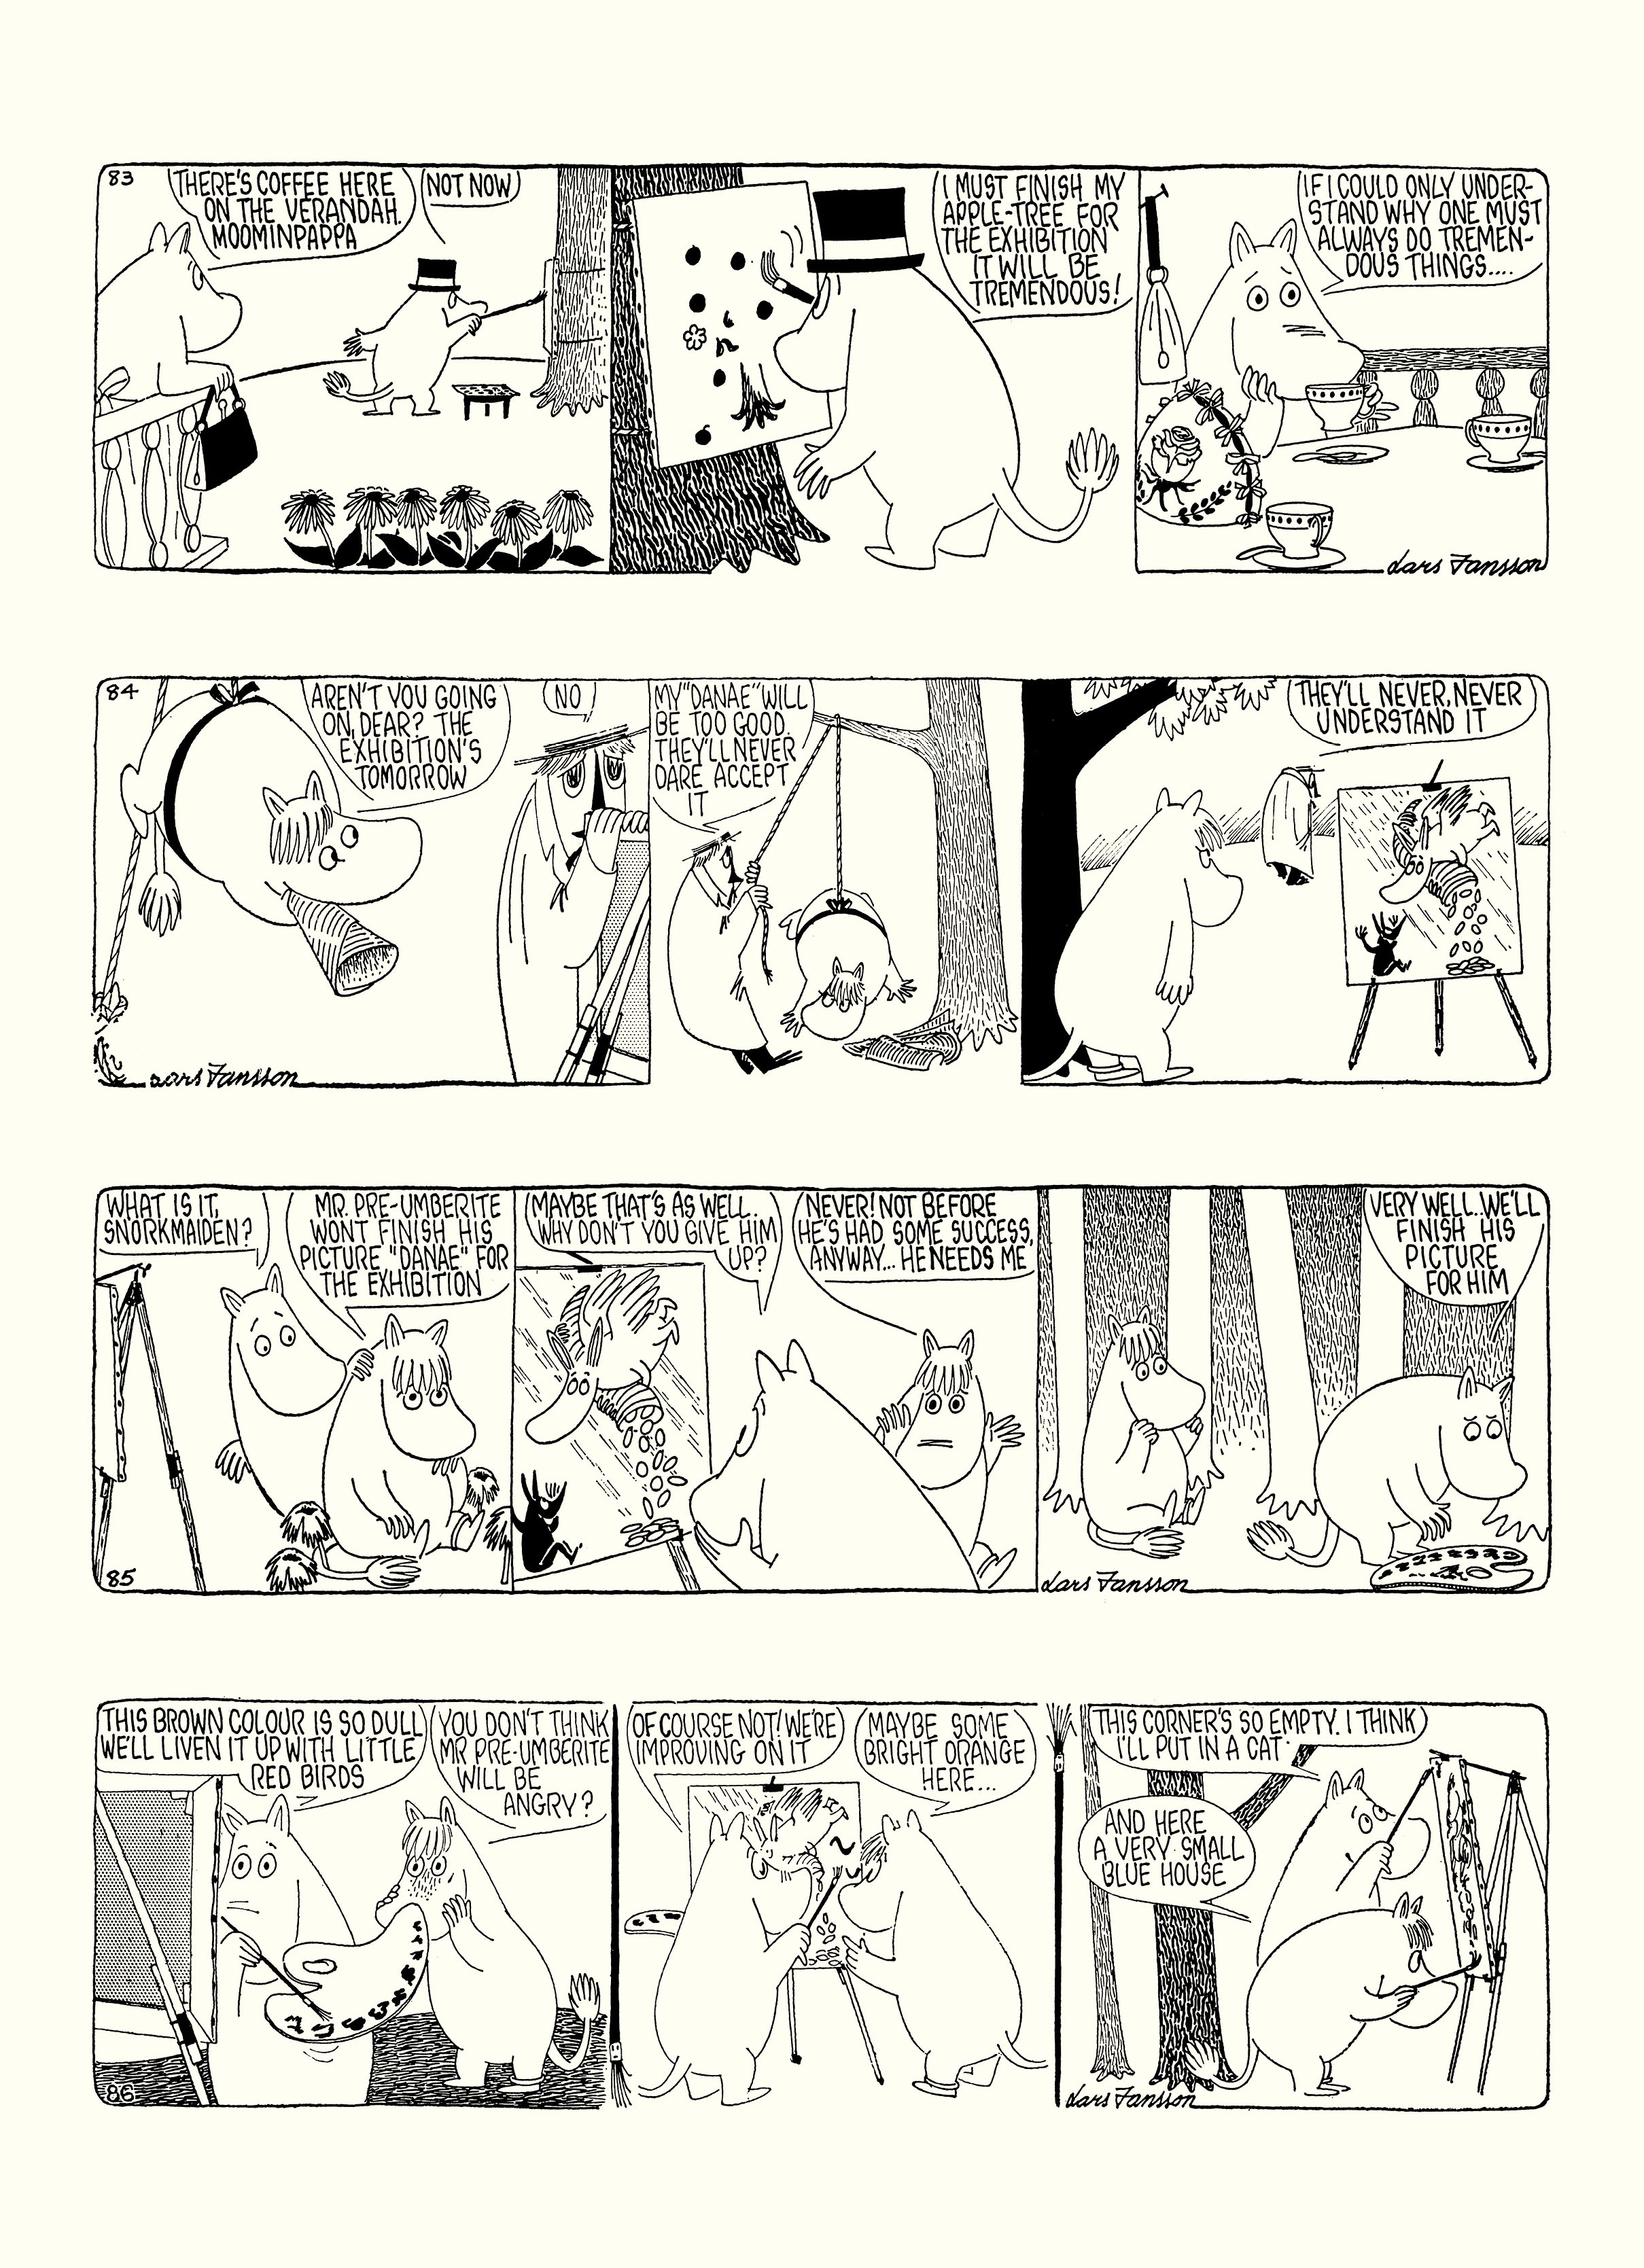 Read online Moomin: The Complete Lars Jansson Comic Strip comic -  Issue # TPB 8 - 48